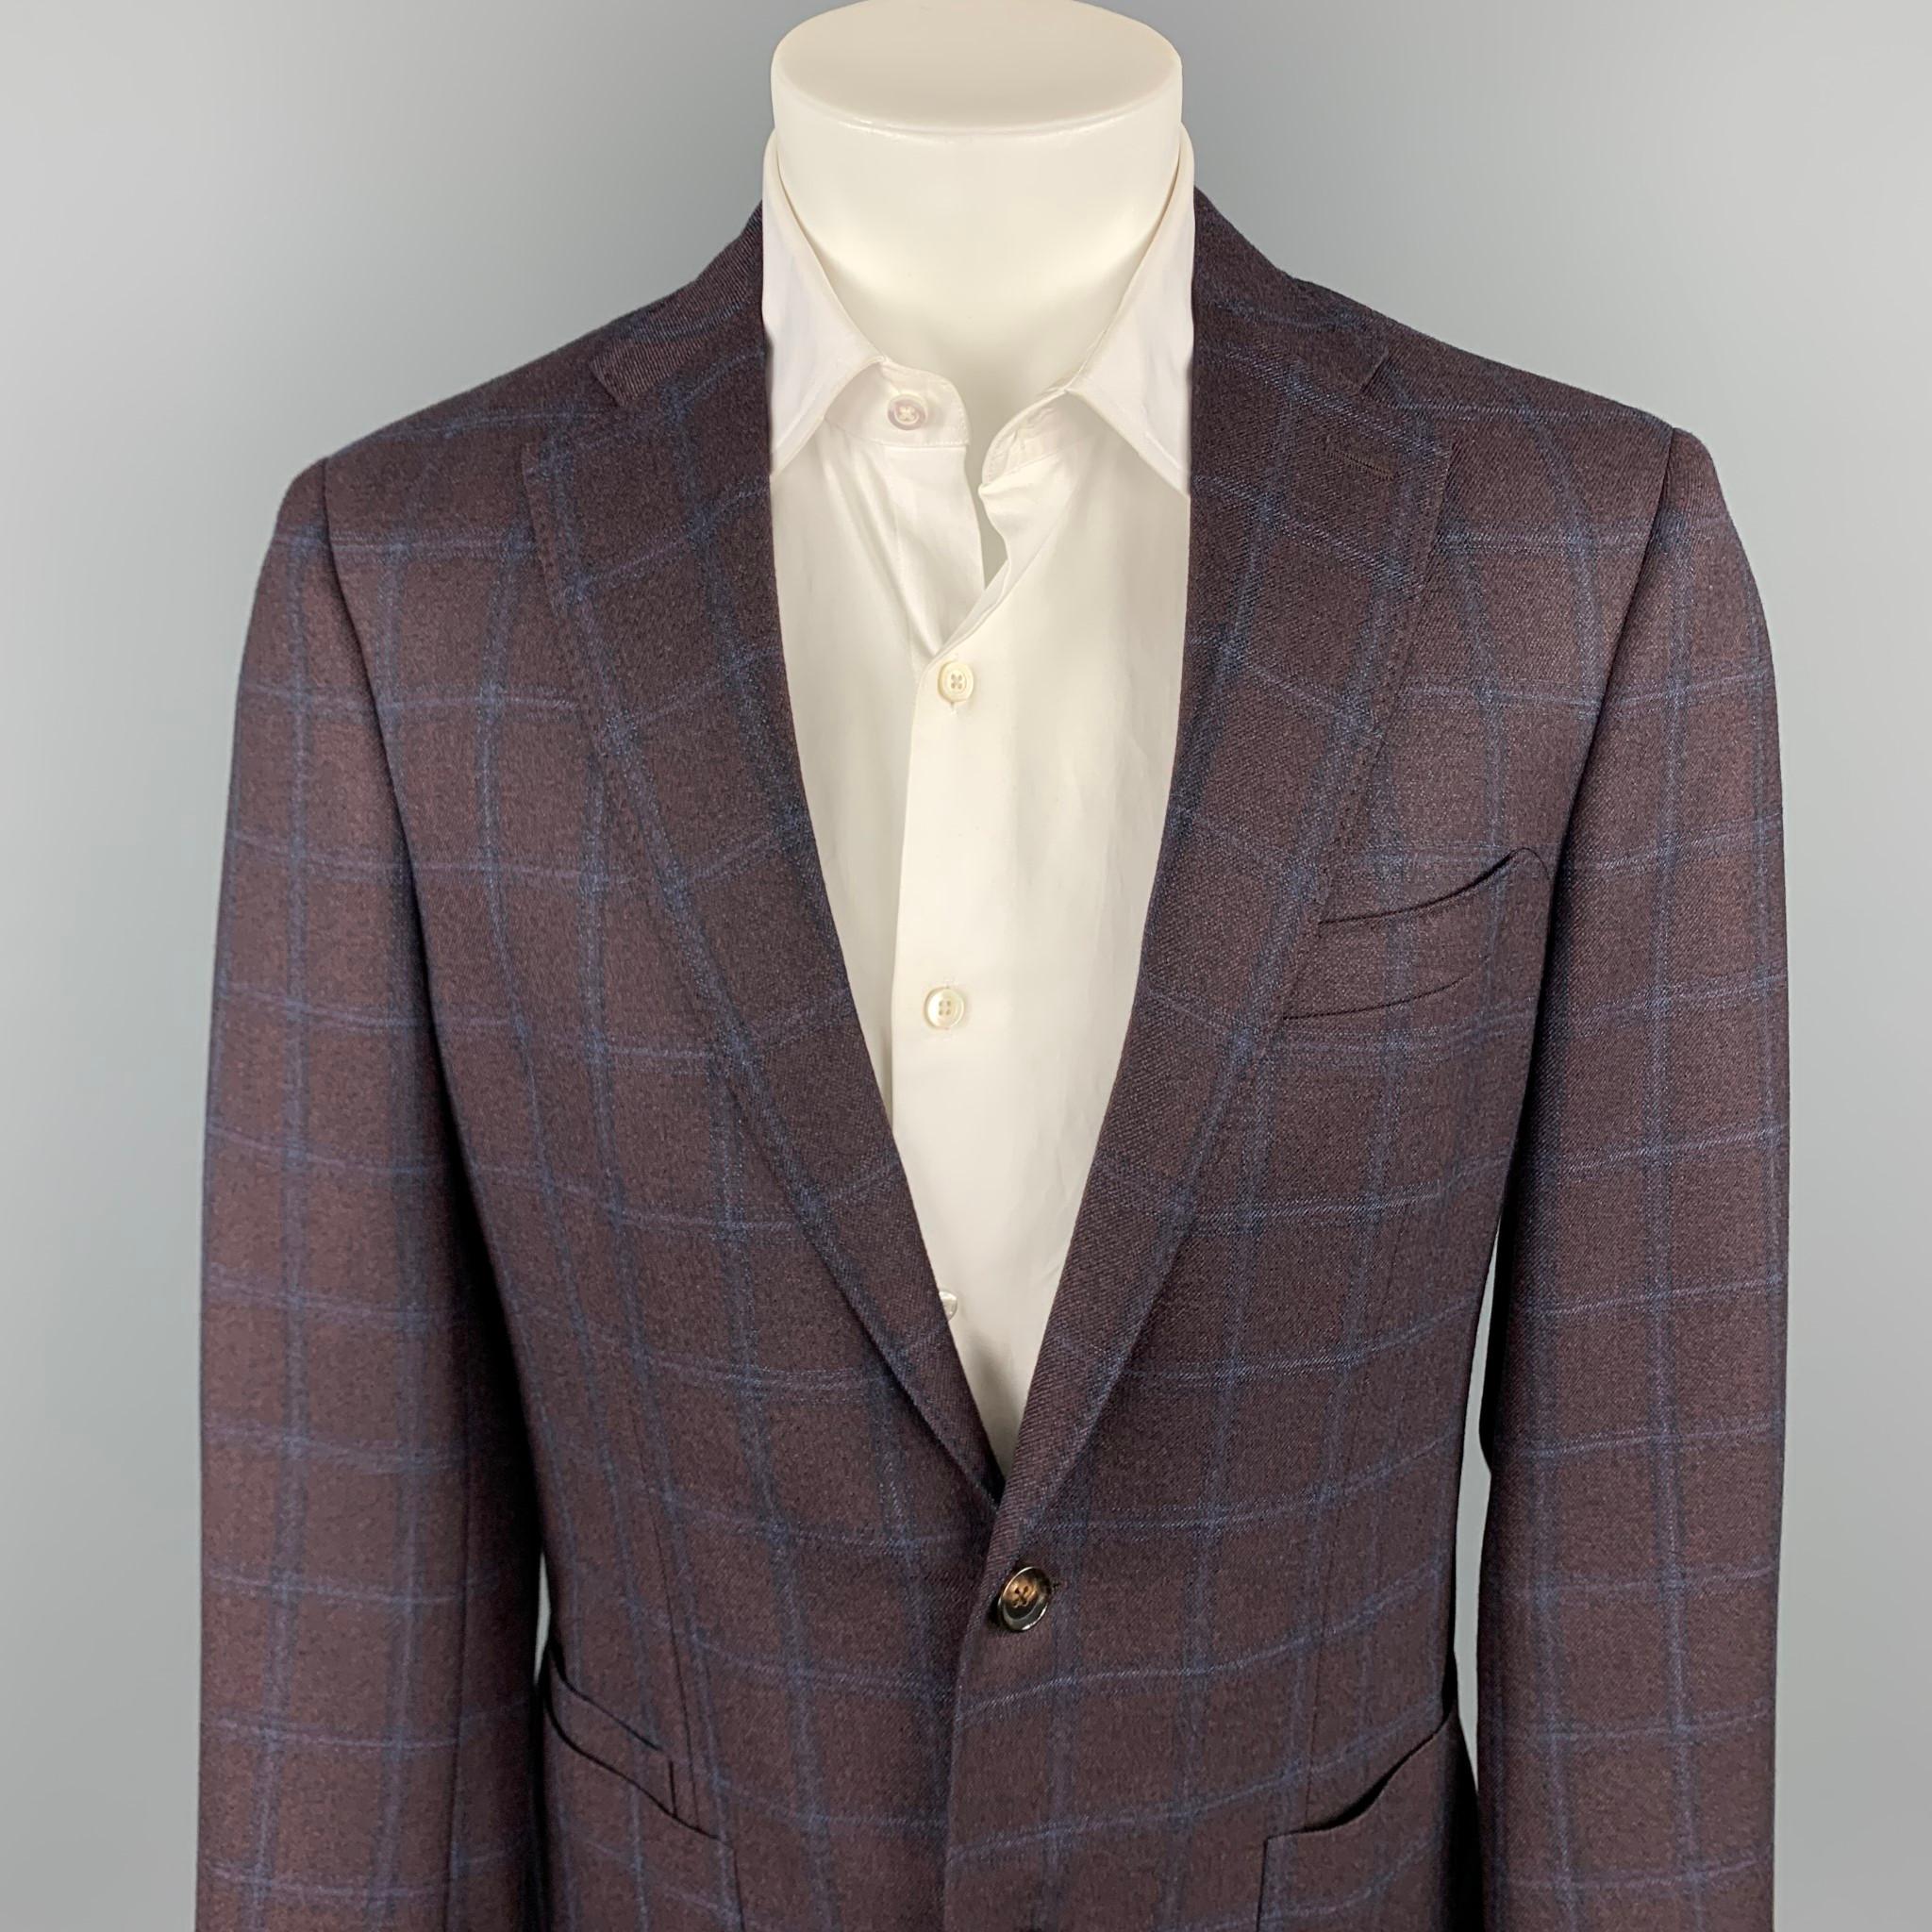 LUCIANO BARBERA custom sport coat comes in a brown & navy window pane wool with a half liner featuring a notch lapel, patch pockets, and a two button closure. Made in Italy.

Very Good Pre-Owned Condition.
Marked: IT 50

Measurements:

Shoulder: 18